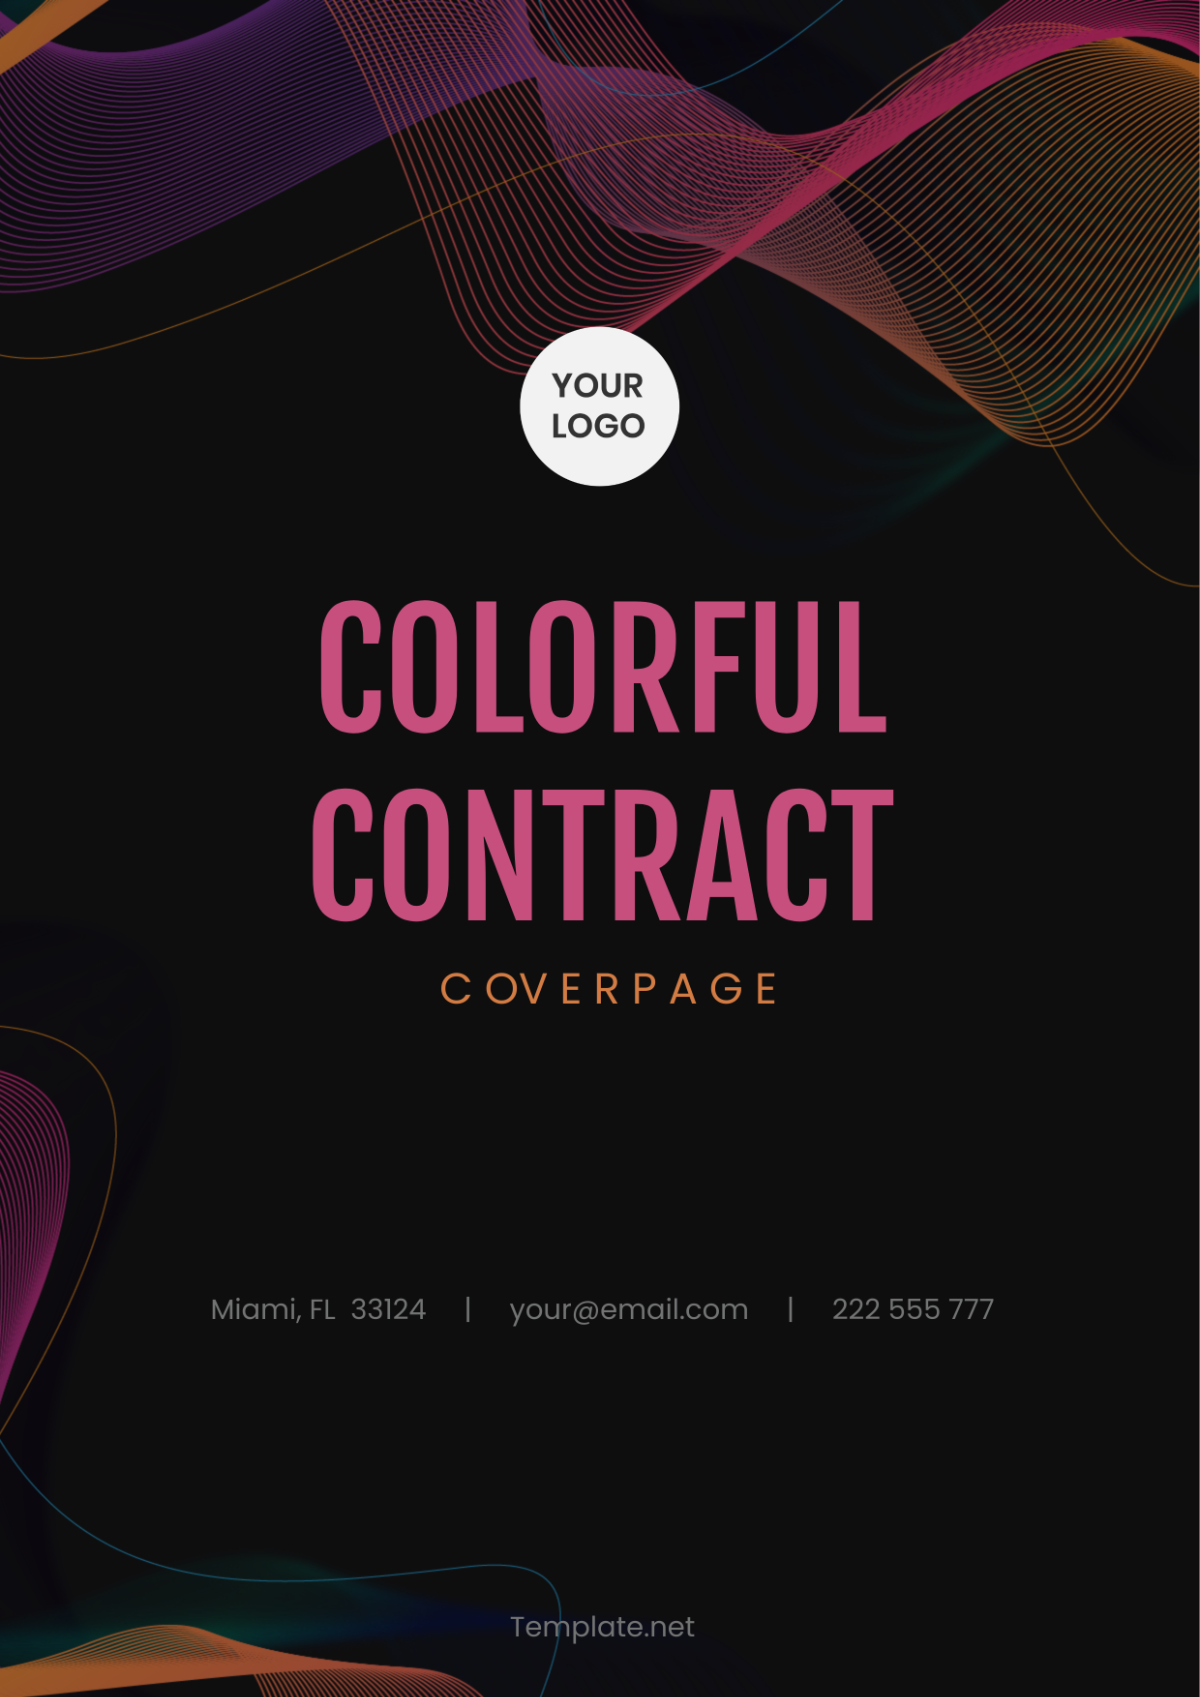 Free Colorful Contract Cover Page Template